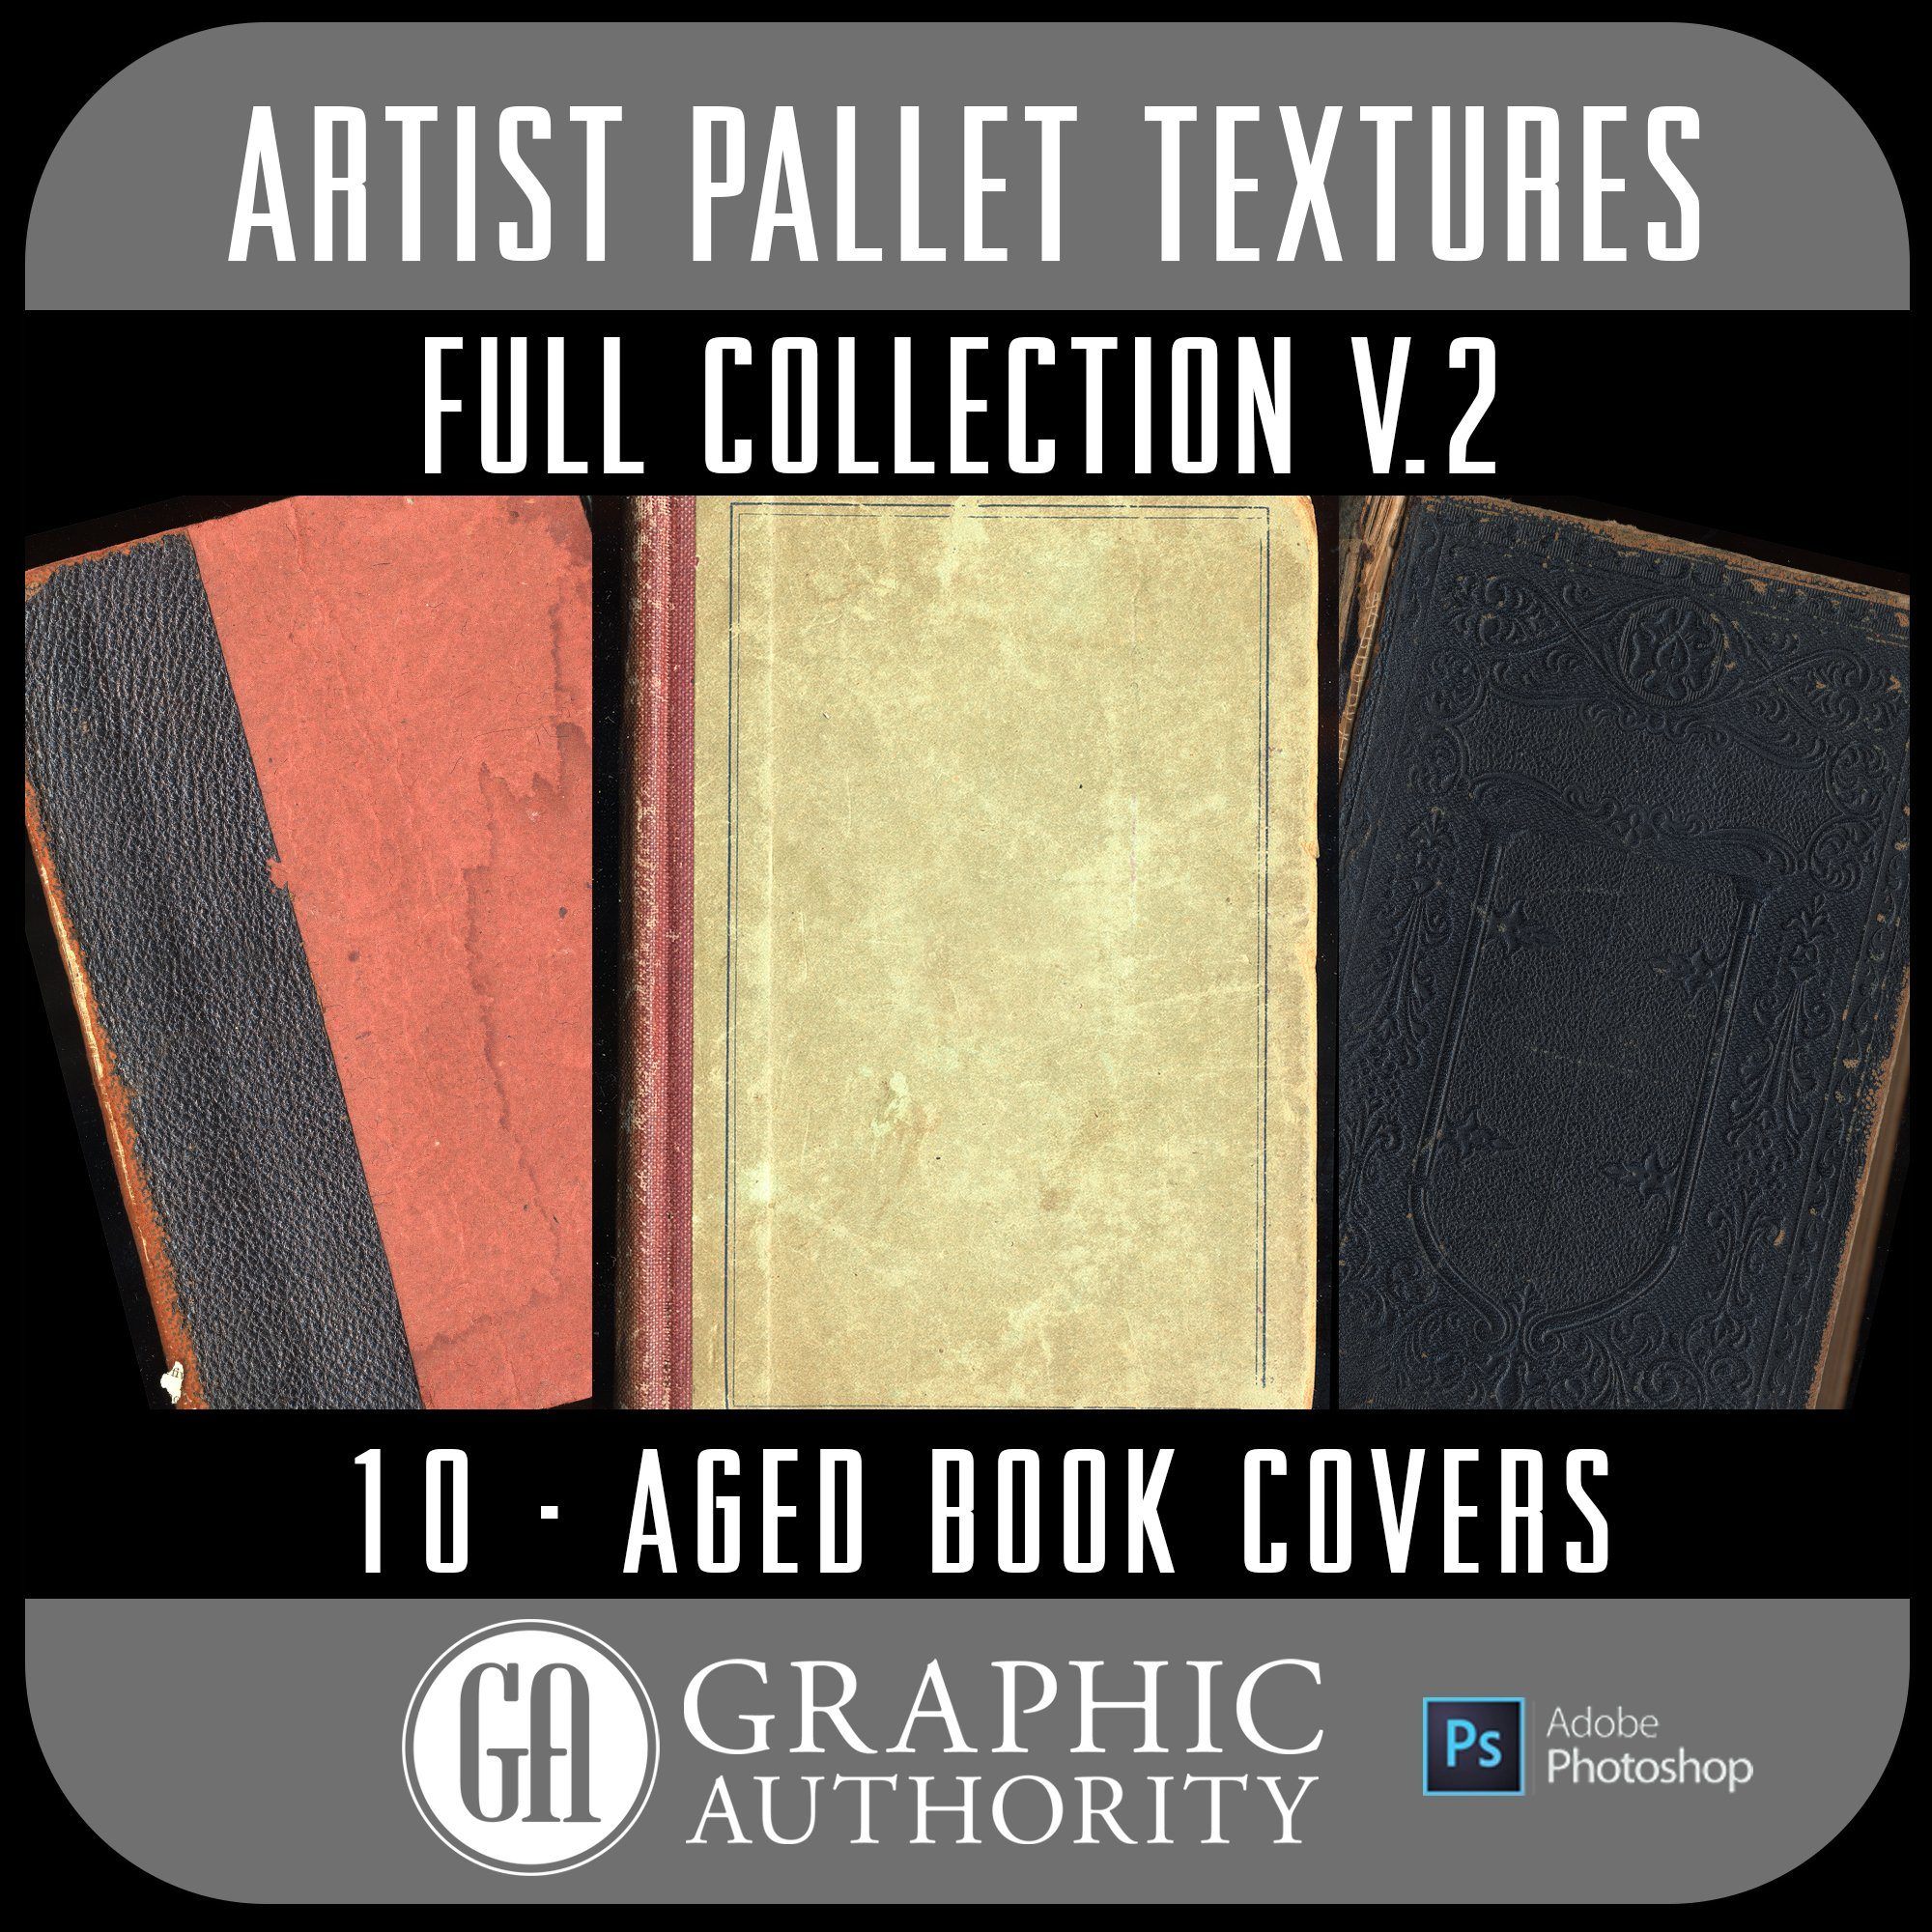 Artist Pallet - V.2 Aged Book Covers - Full Collection-Photoshop Template - Graphic Authority